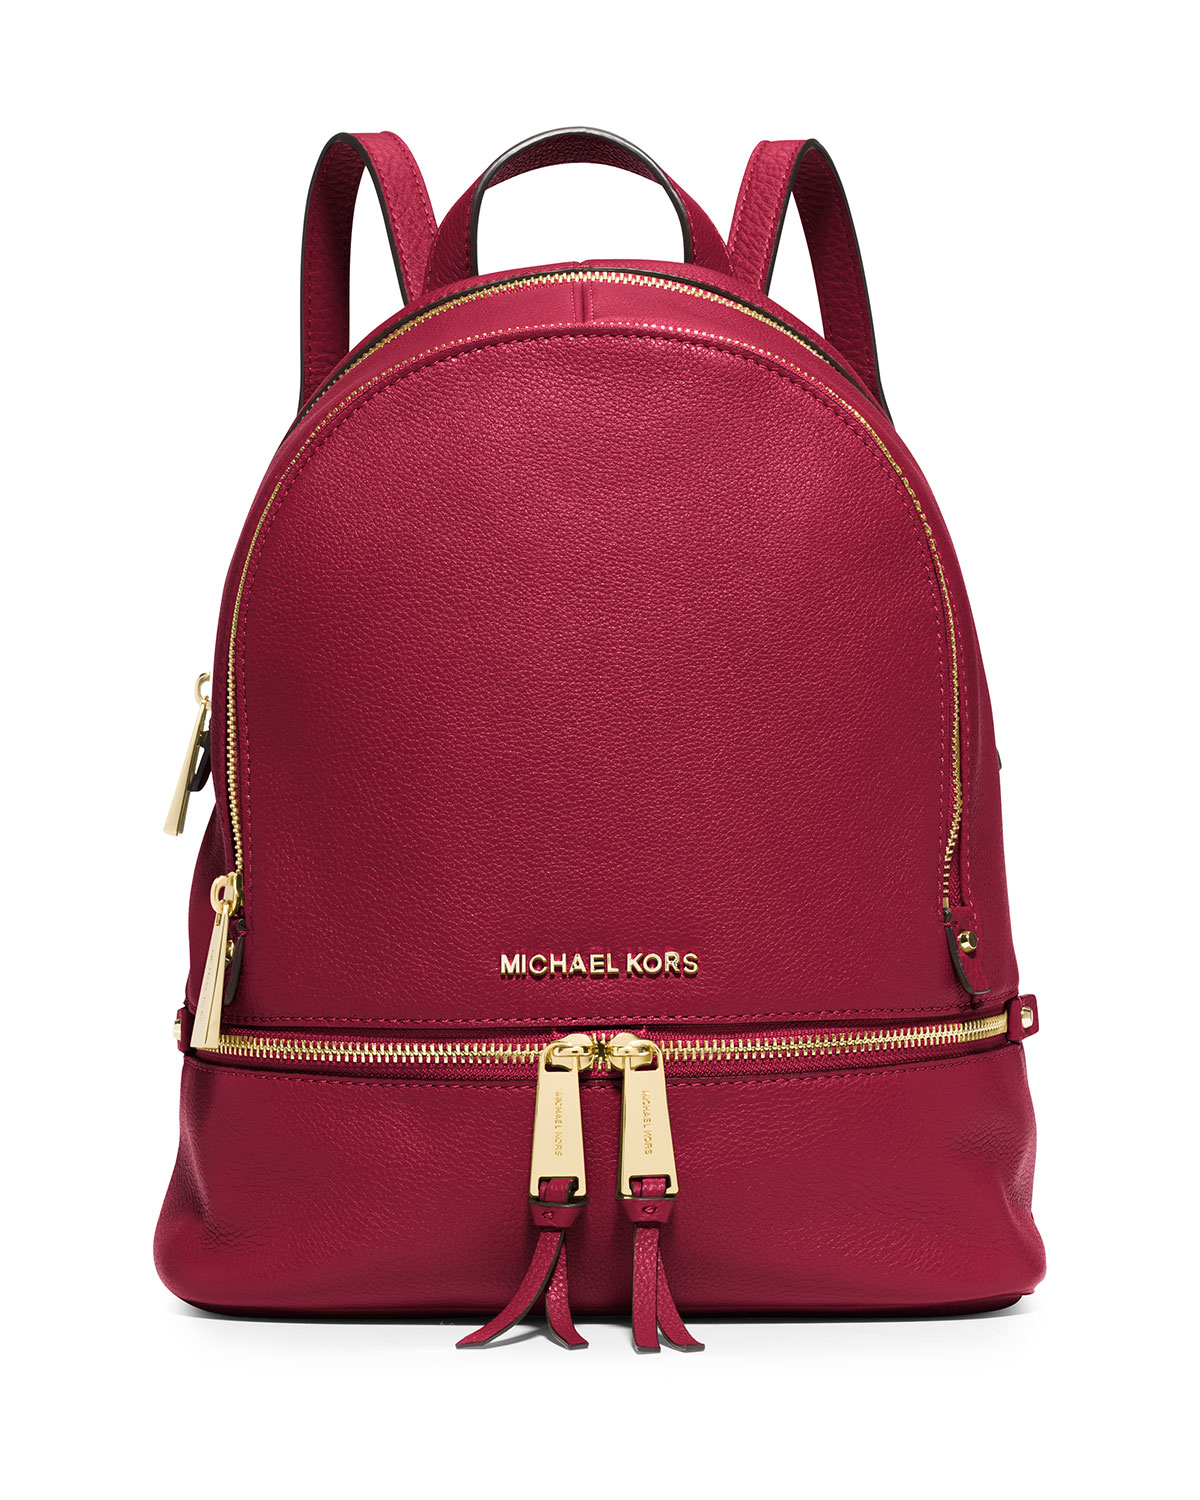 Lyst - Michael Michael Kors Rhea Small Leather Zip Backpack in Red